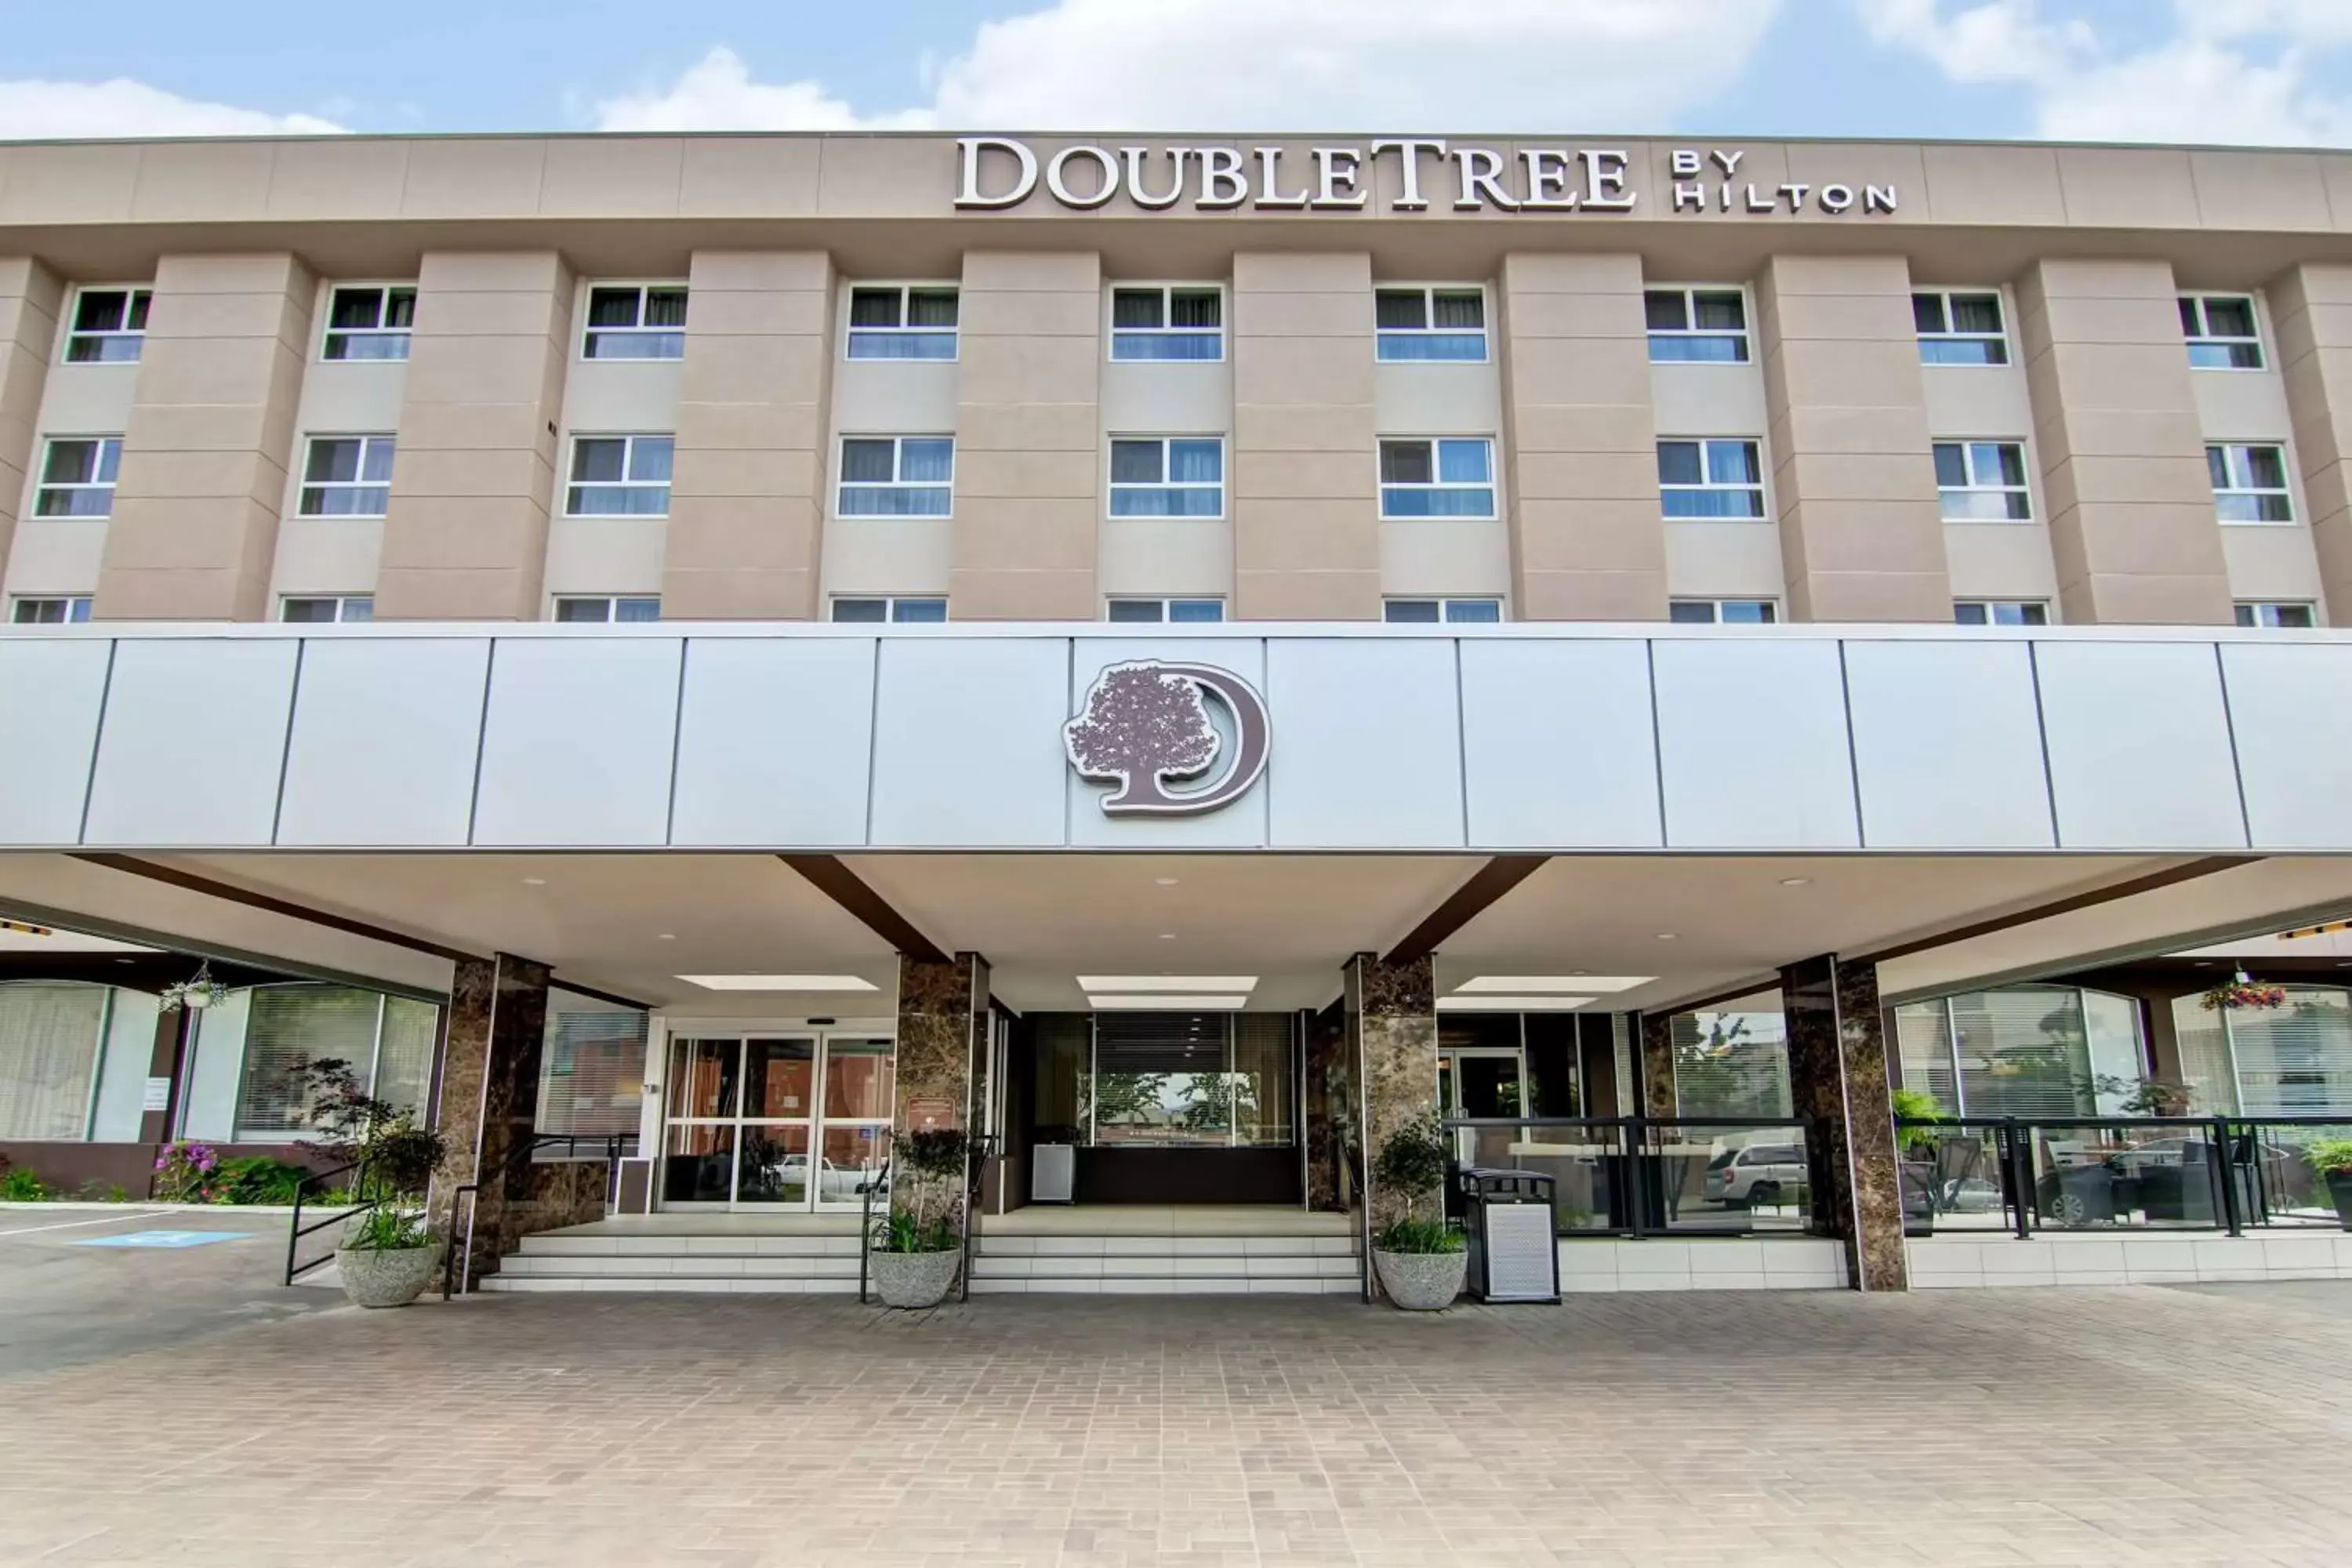 Property Building in DoubleTree by Hilton - Kamloops